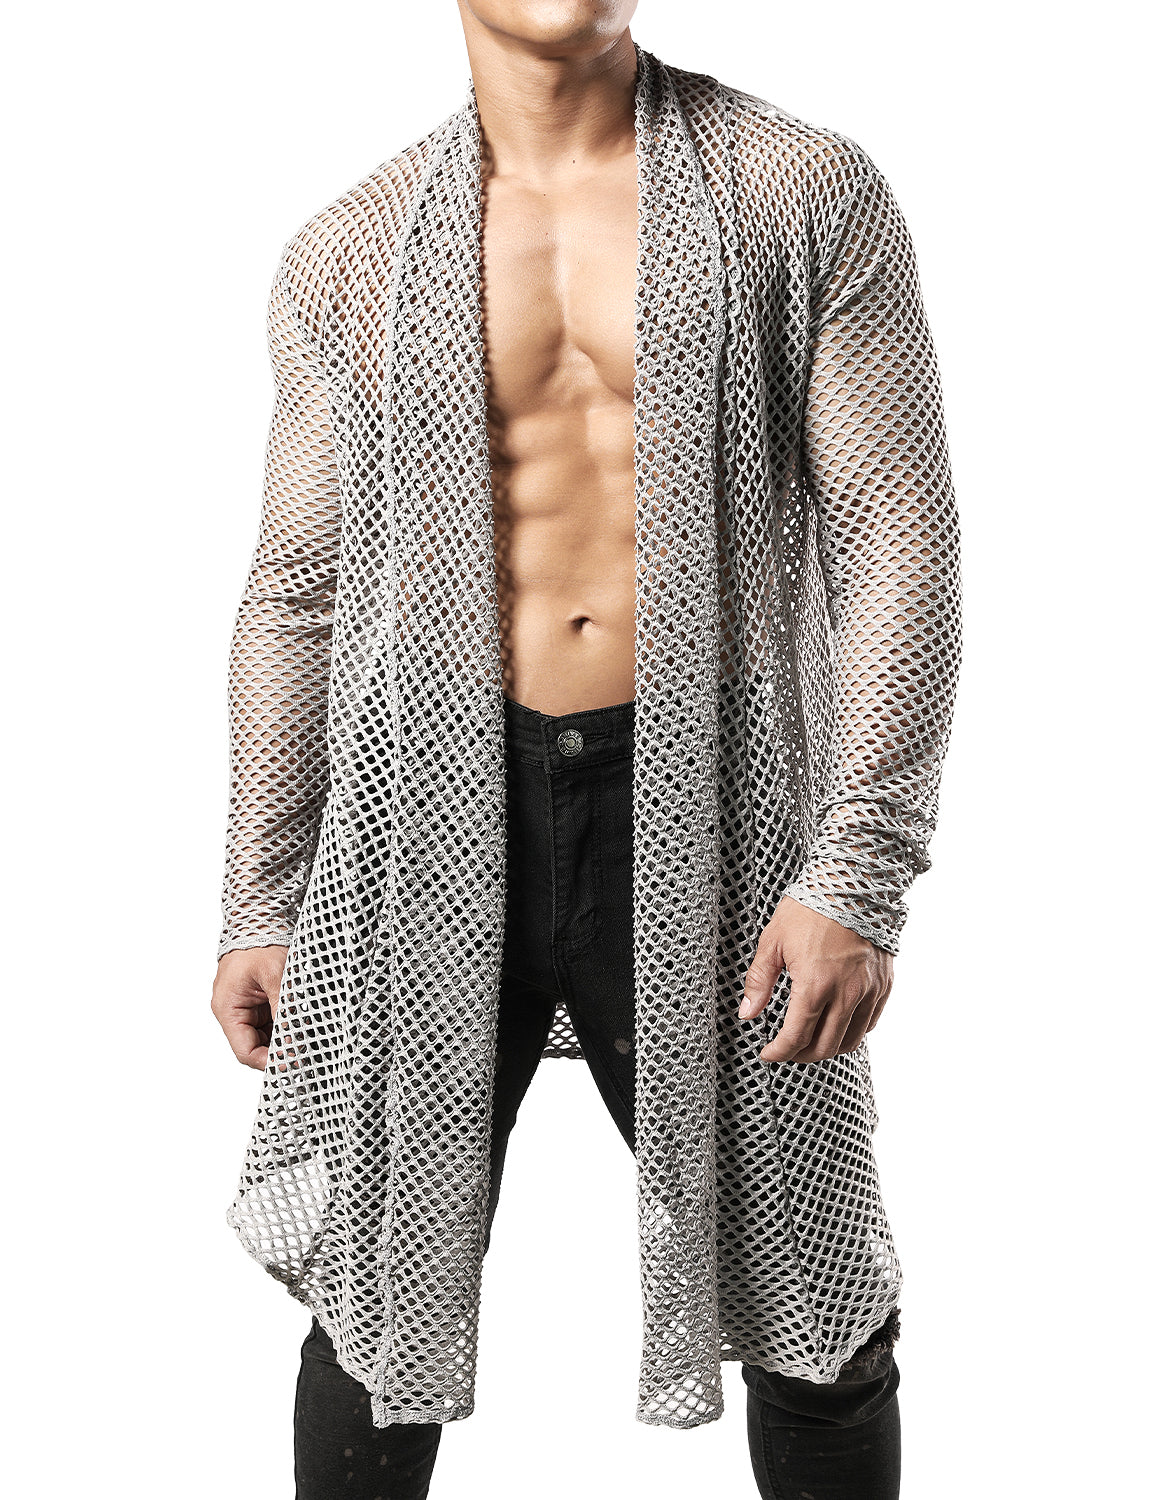 Men's Mesh Fishnet Fitted Muscle Cardigan